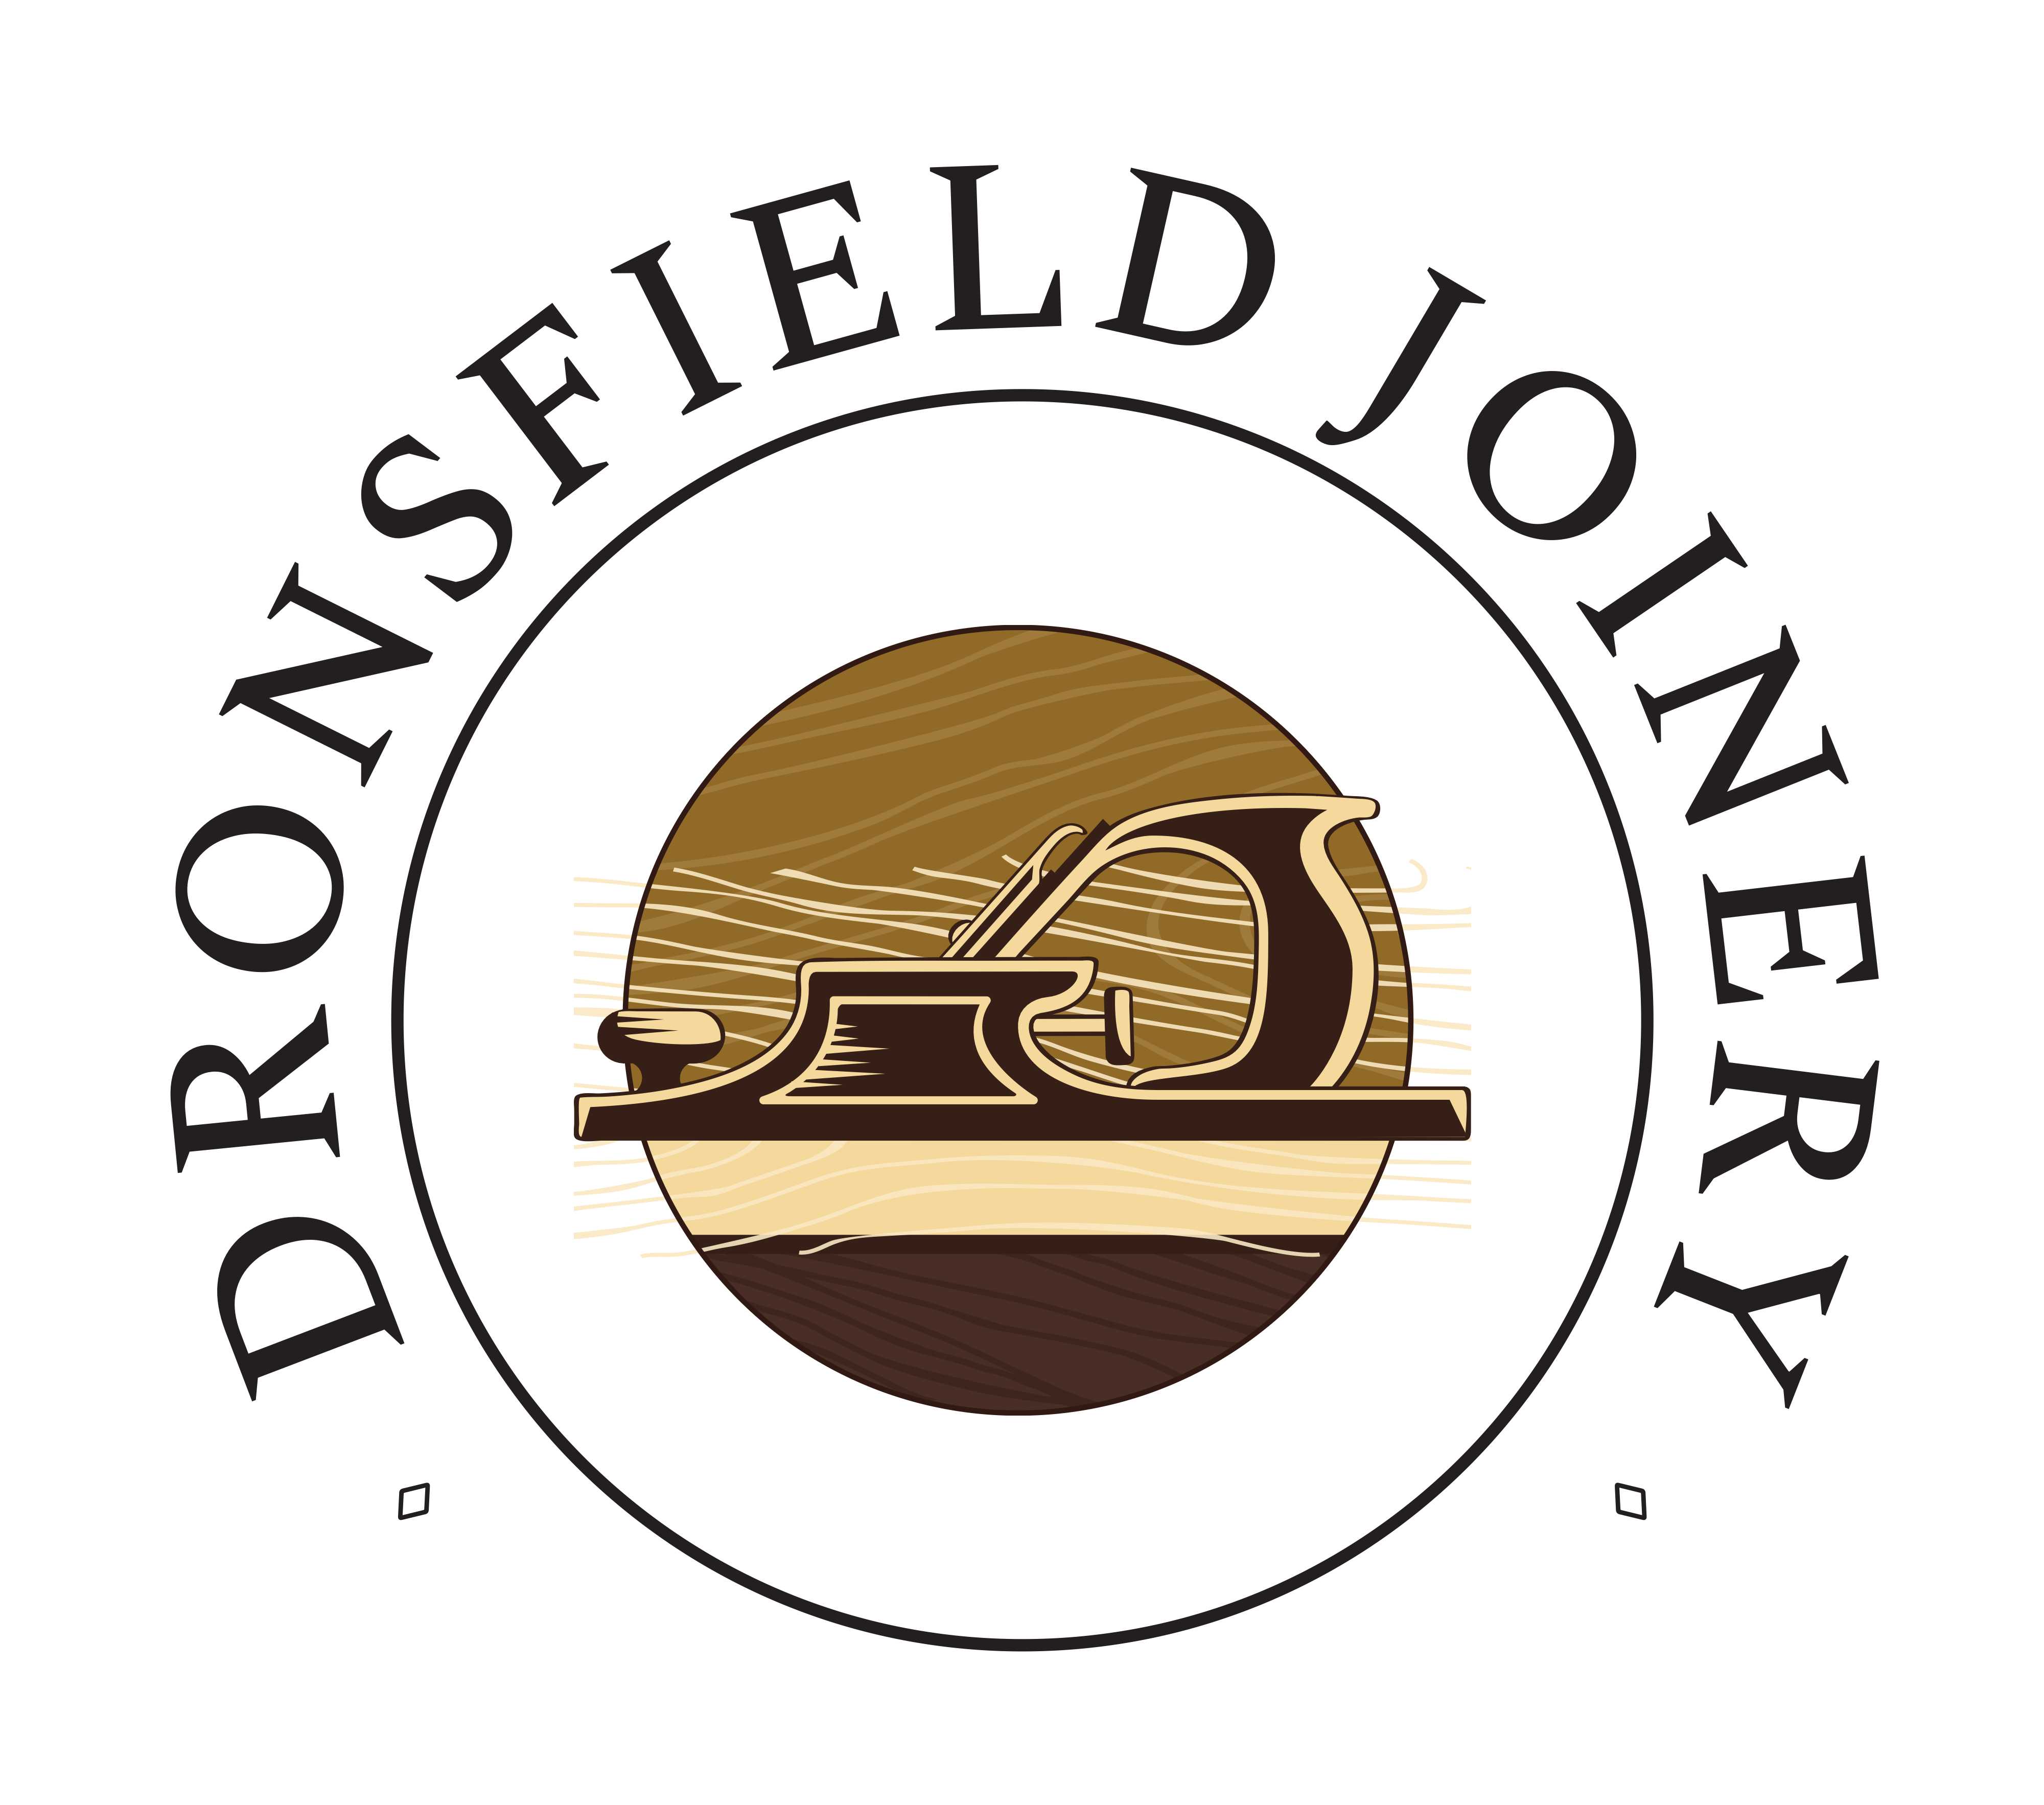 Dronsfield Joinery